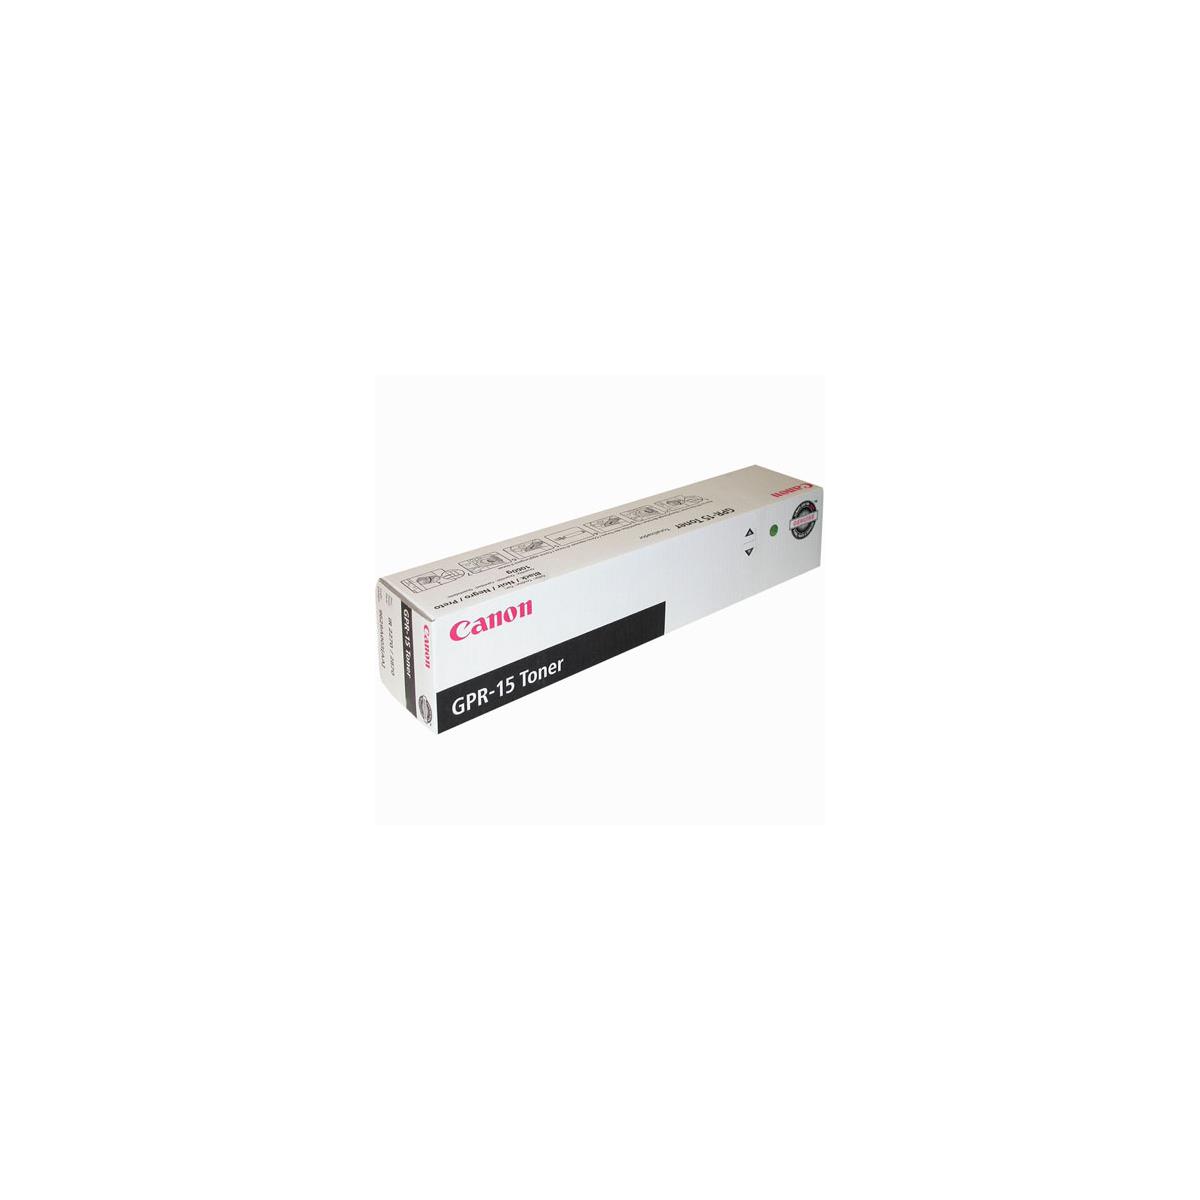 Canon GPR-15 Black Laser Toner Cartridge This genuine Canon GPR-15 black laser toner cartridge is designed for the Canon ImageRUNNER 2230 / 2270 / 2830 / 2870 / 3025 / 3030 laser toner copiers, and has an average yield capacity of 21,000 pages